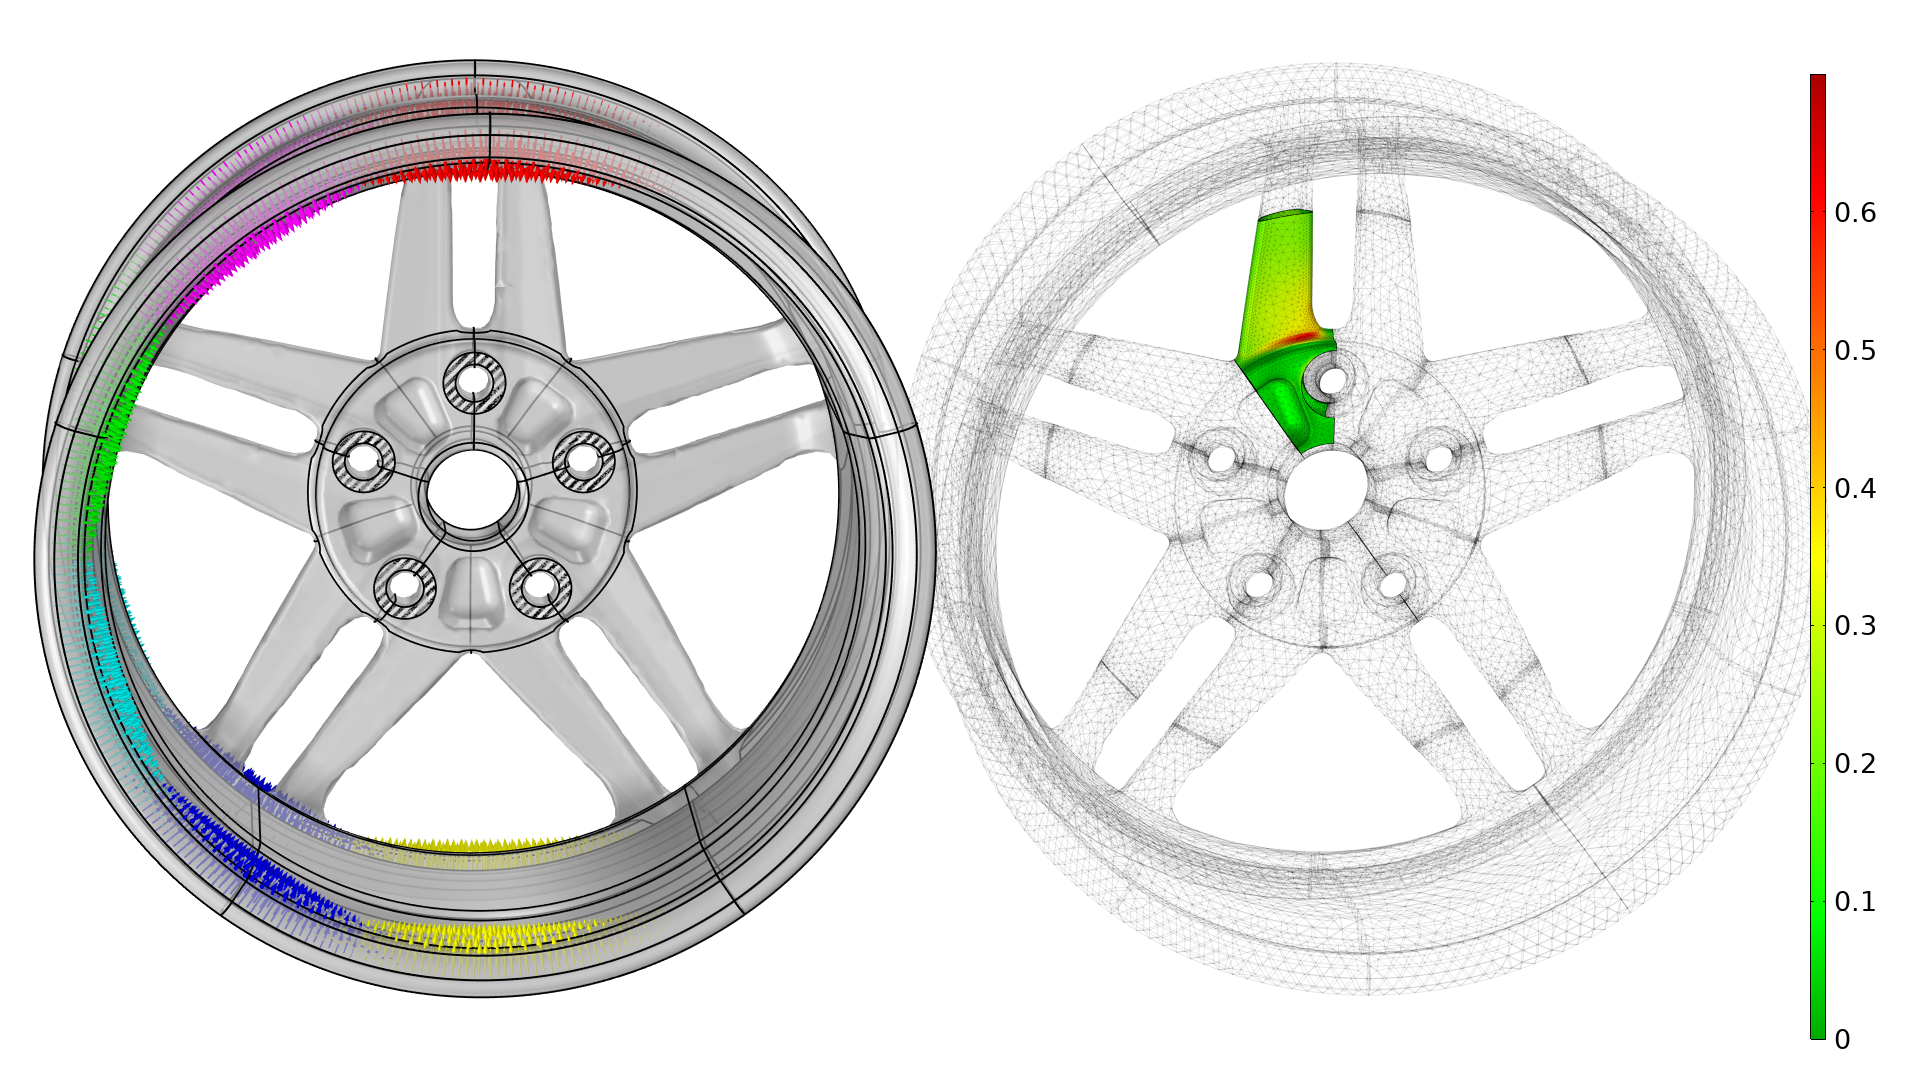 Fatigue analysis plots of a model of a wheel rim. At left, the different load cases are illustrated in different colors. At right is a plot of the initial fatigue usage factor.